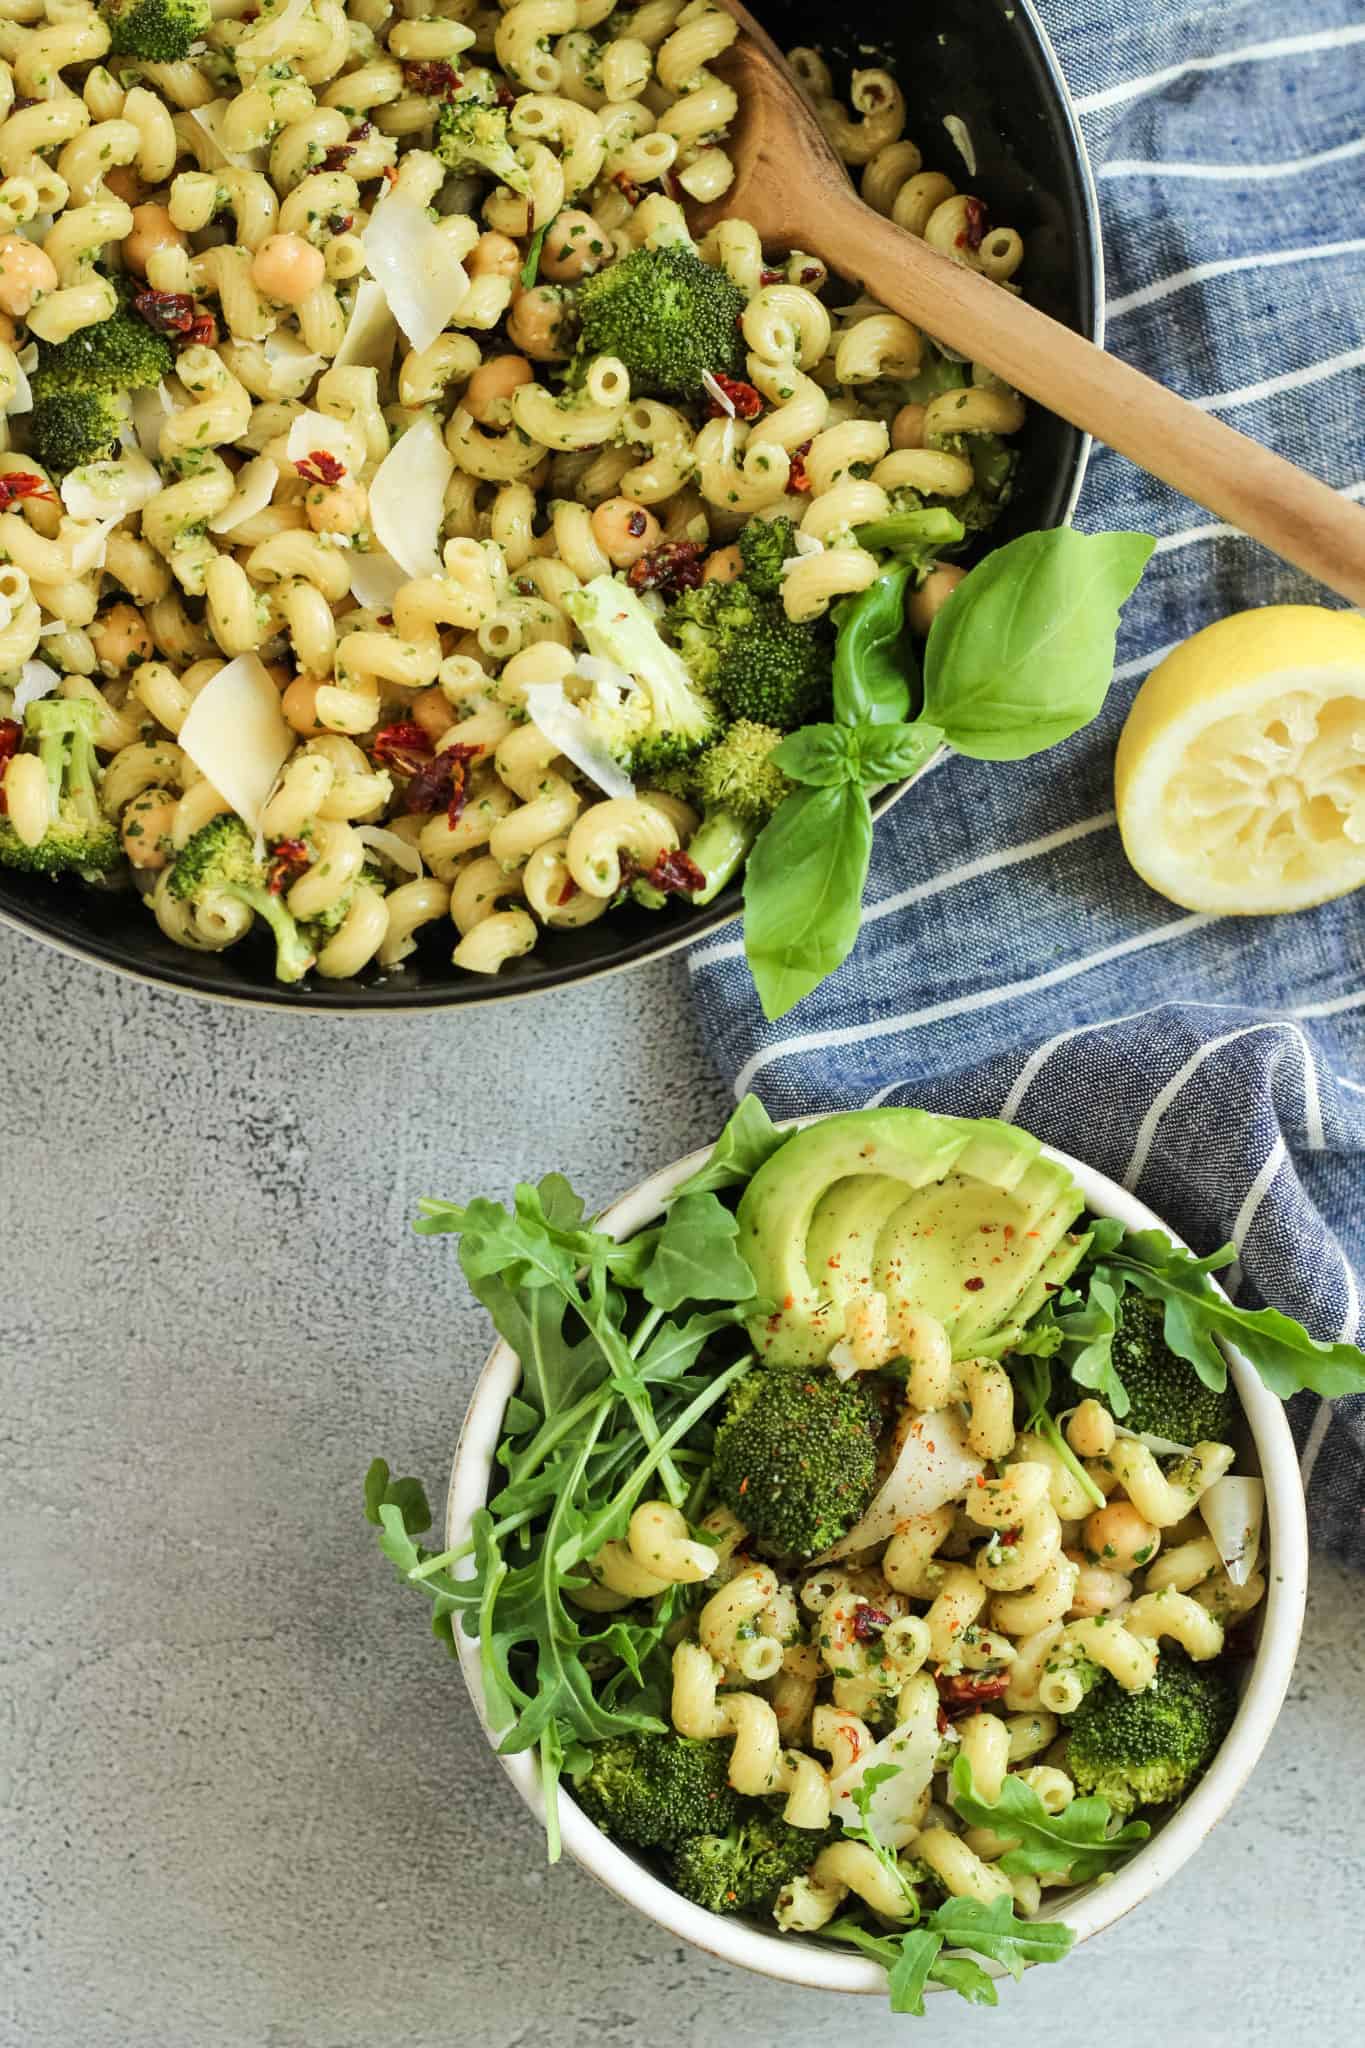 {No Mayo} Easy Pesto Pasta Salad with Sun-Dried Tomatoes from Street Smart Nutrition